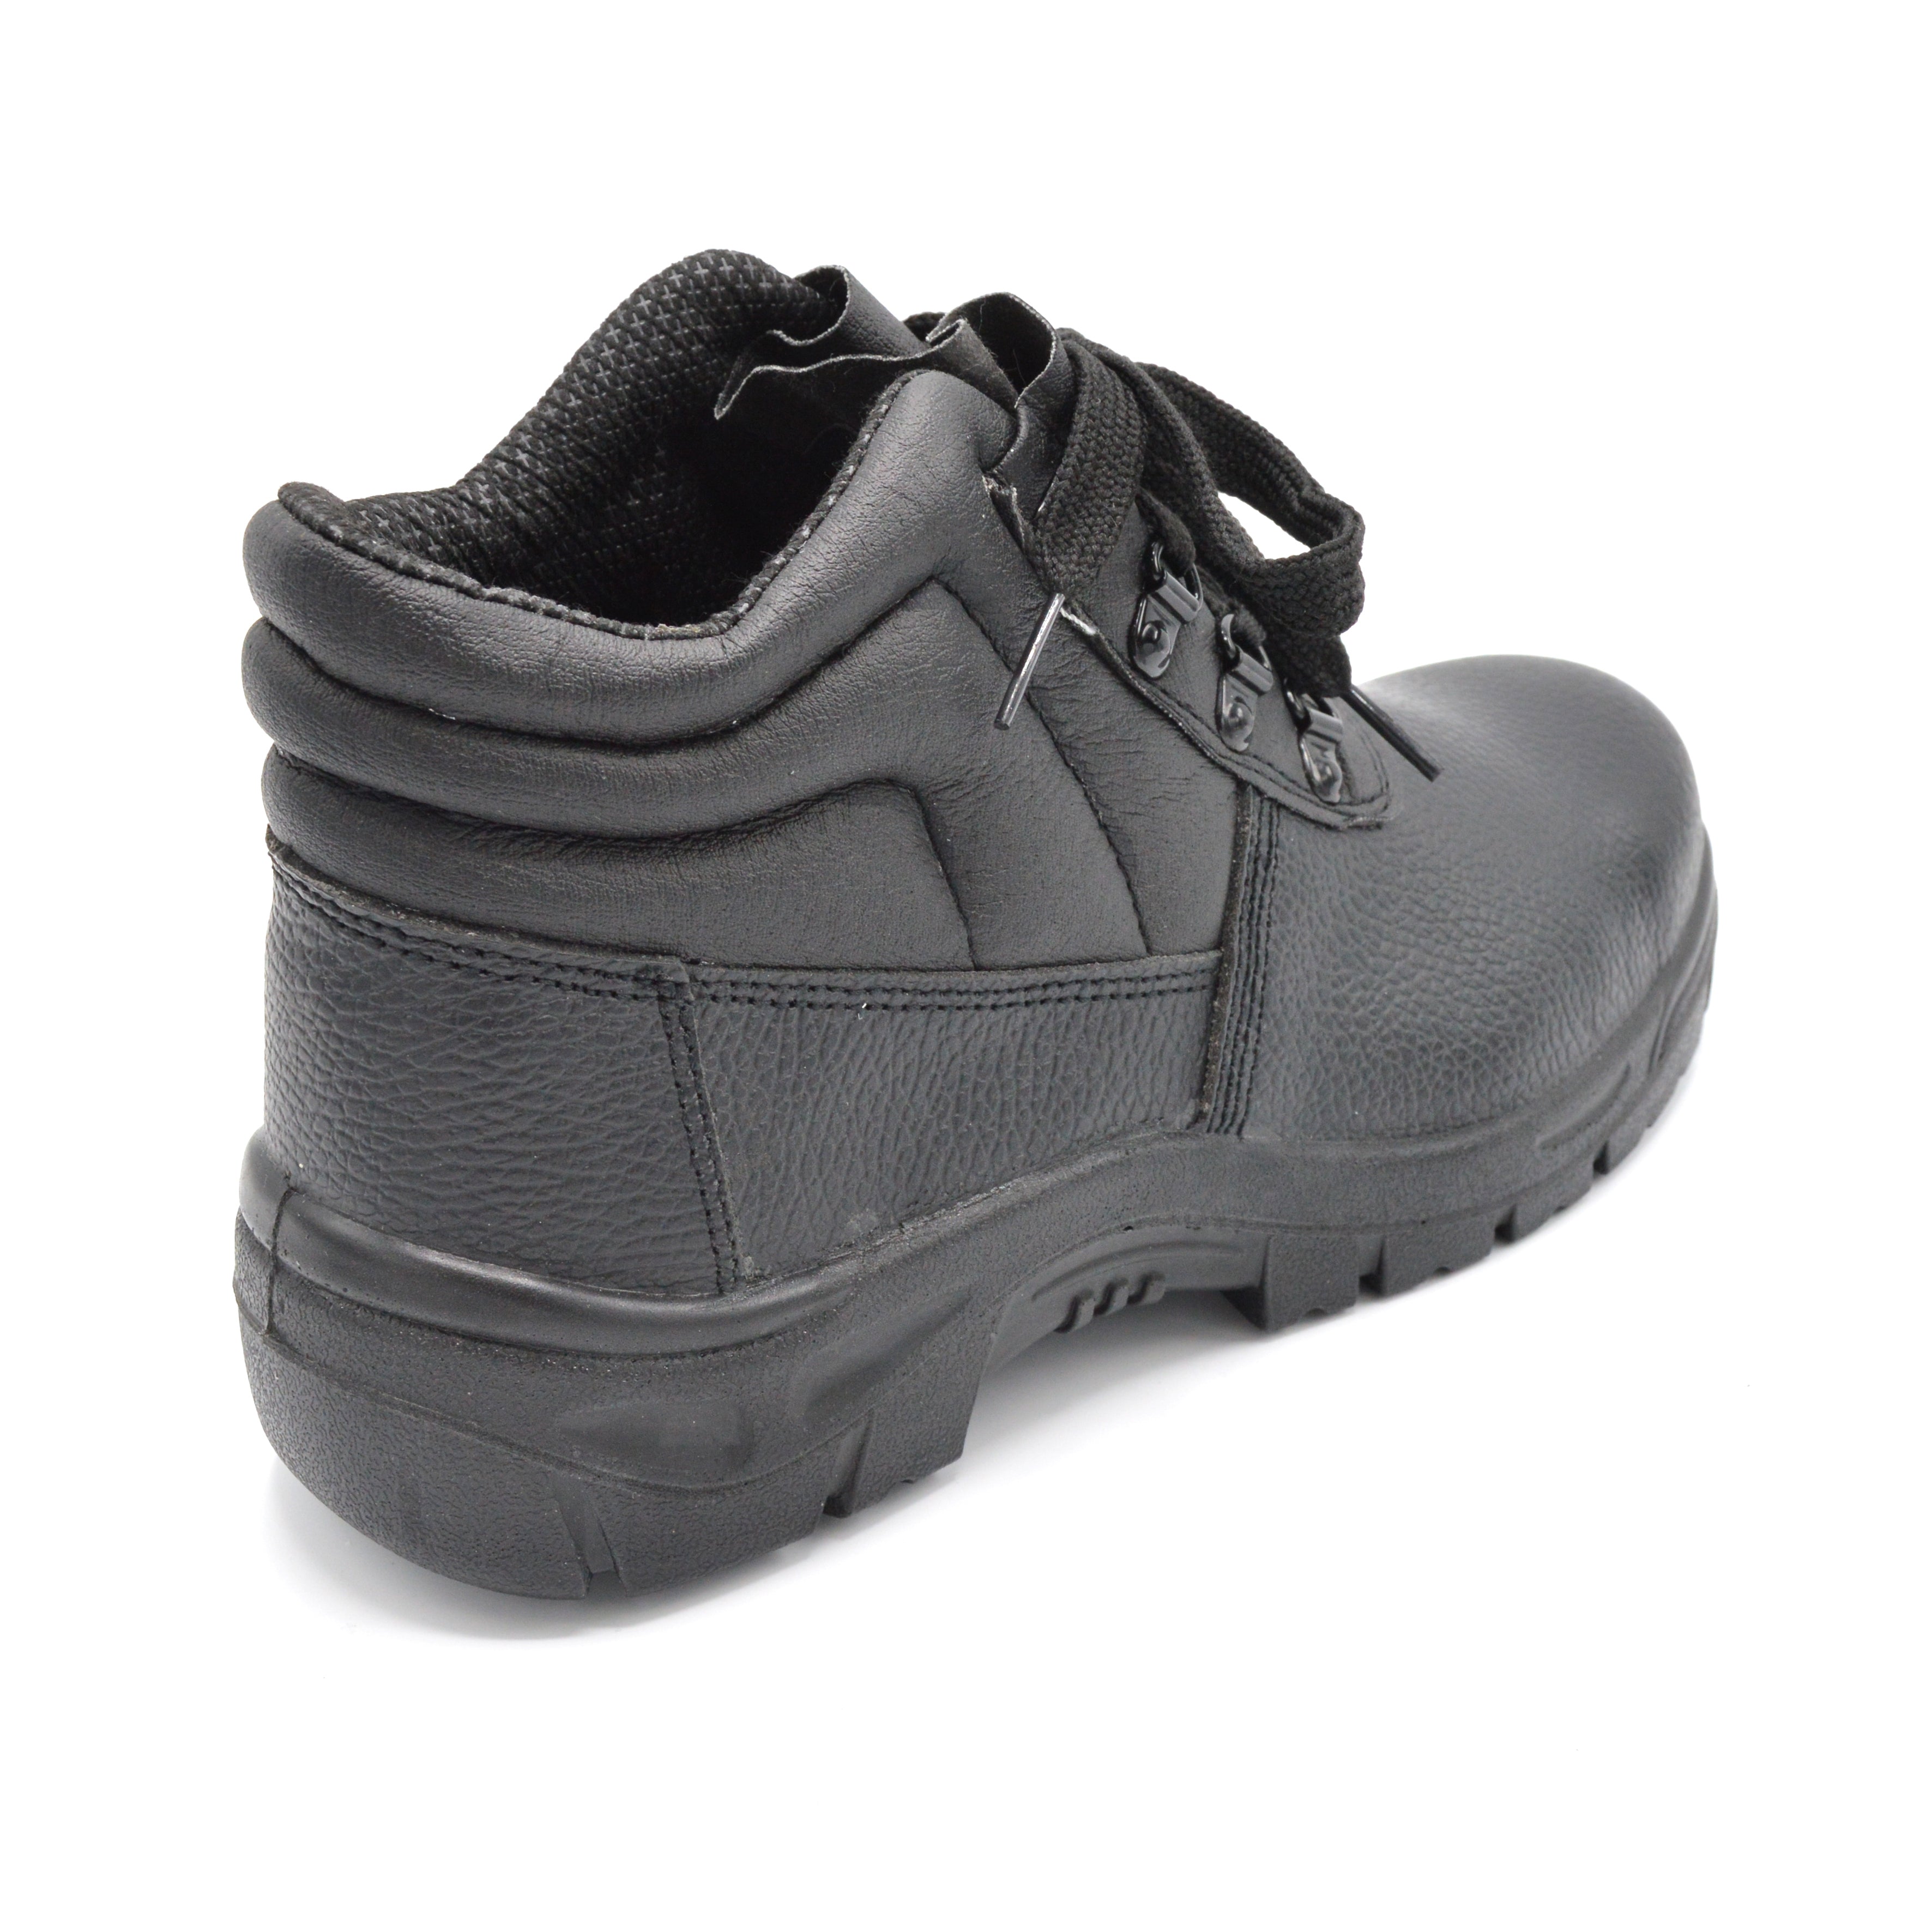 Lightweight Work Boot With Padded Collar